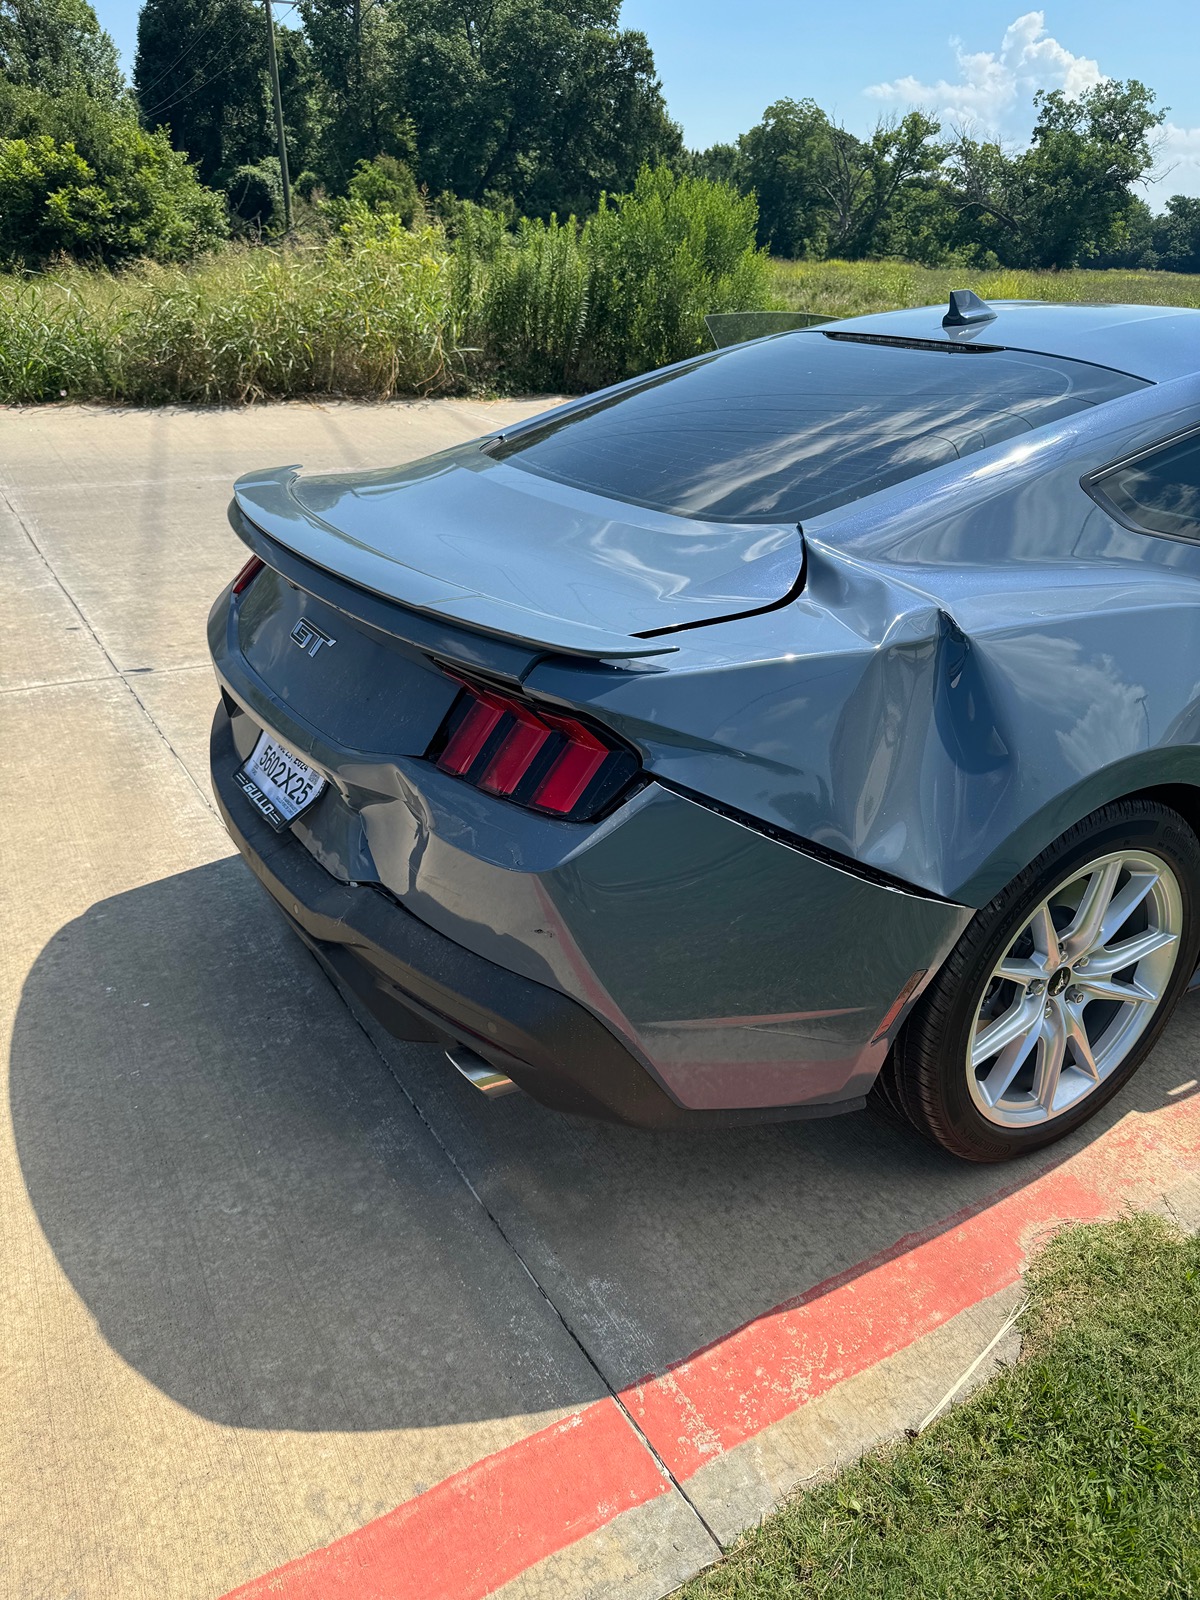 S650 Mustang Rear ended. Frame damage possible IMG_6505